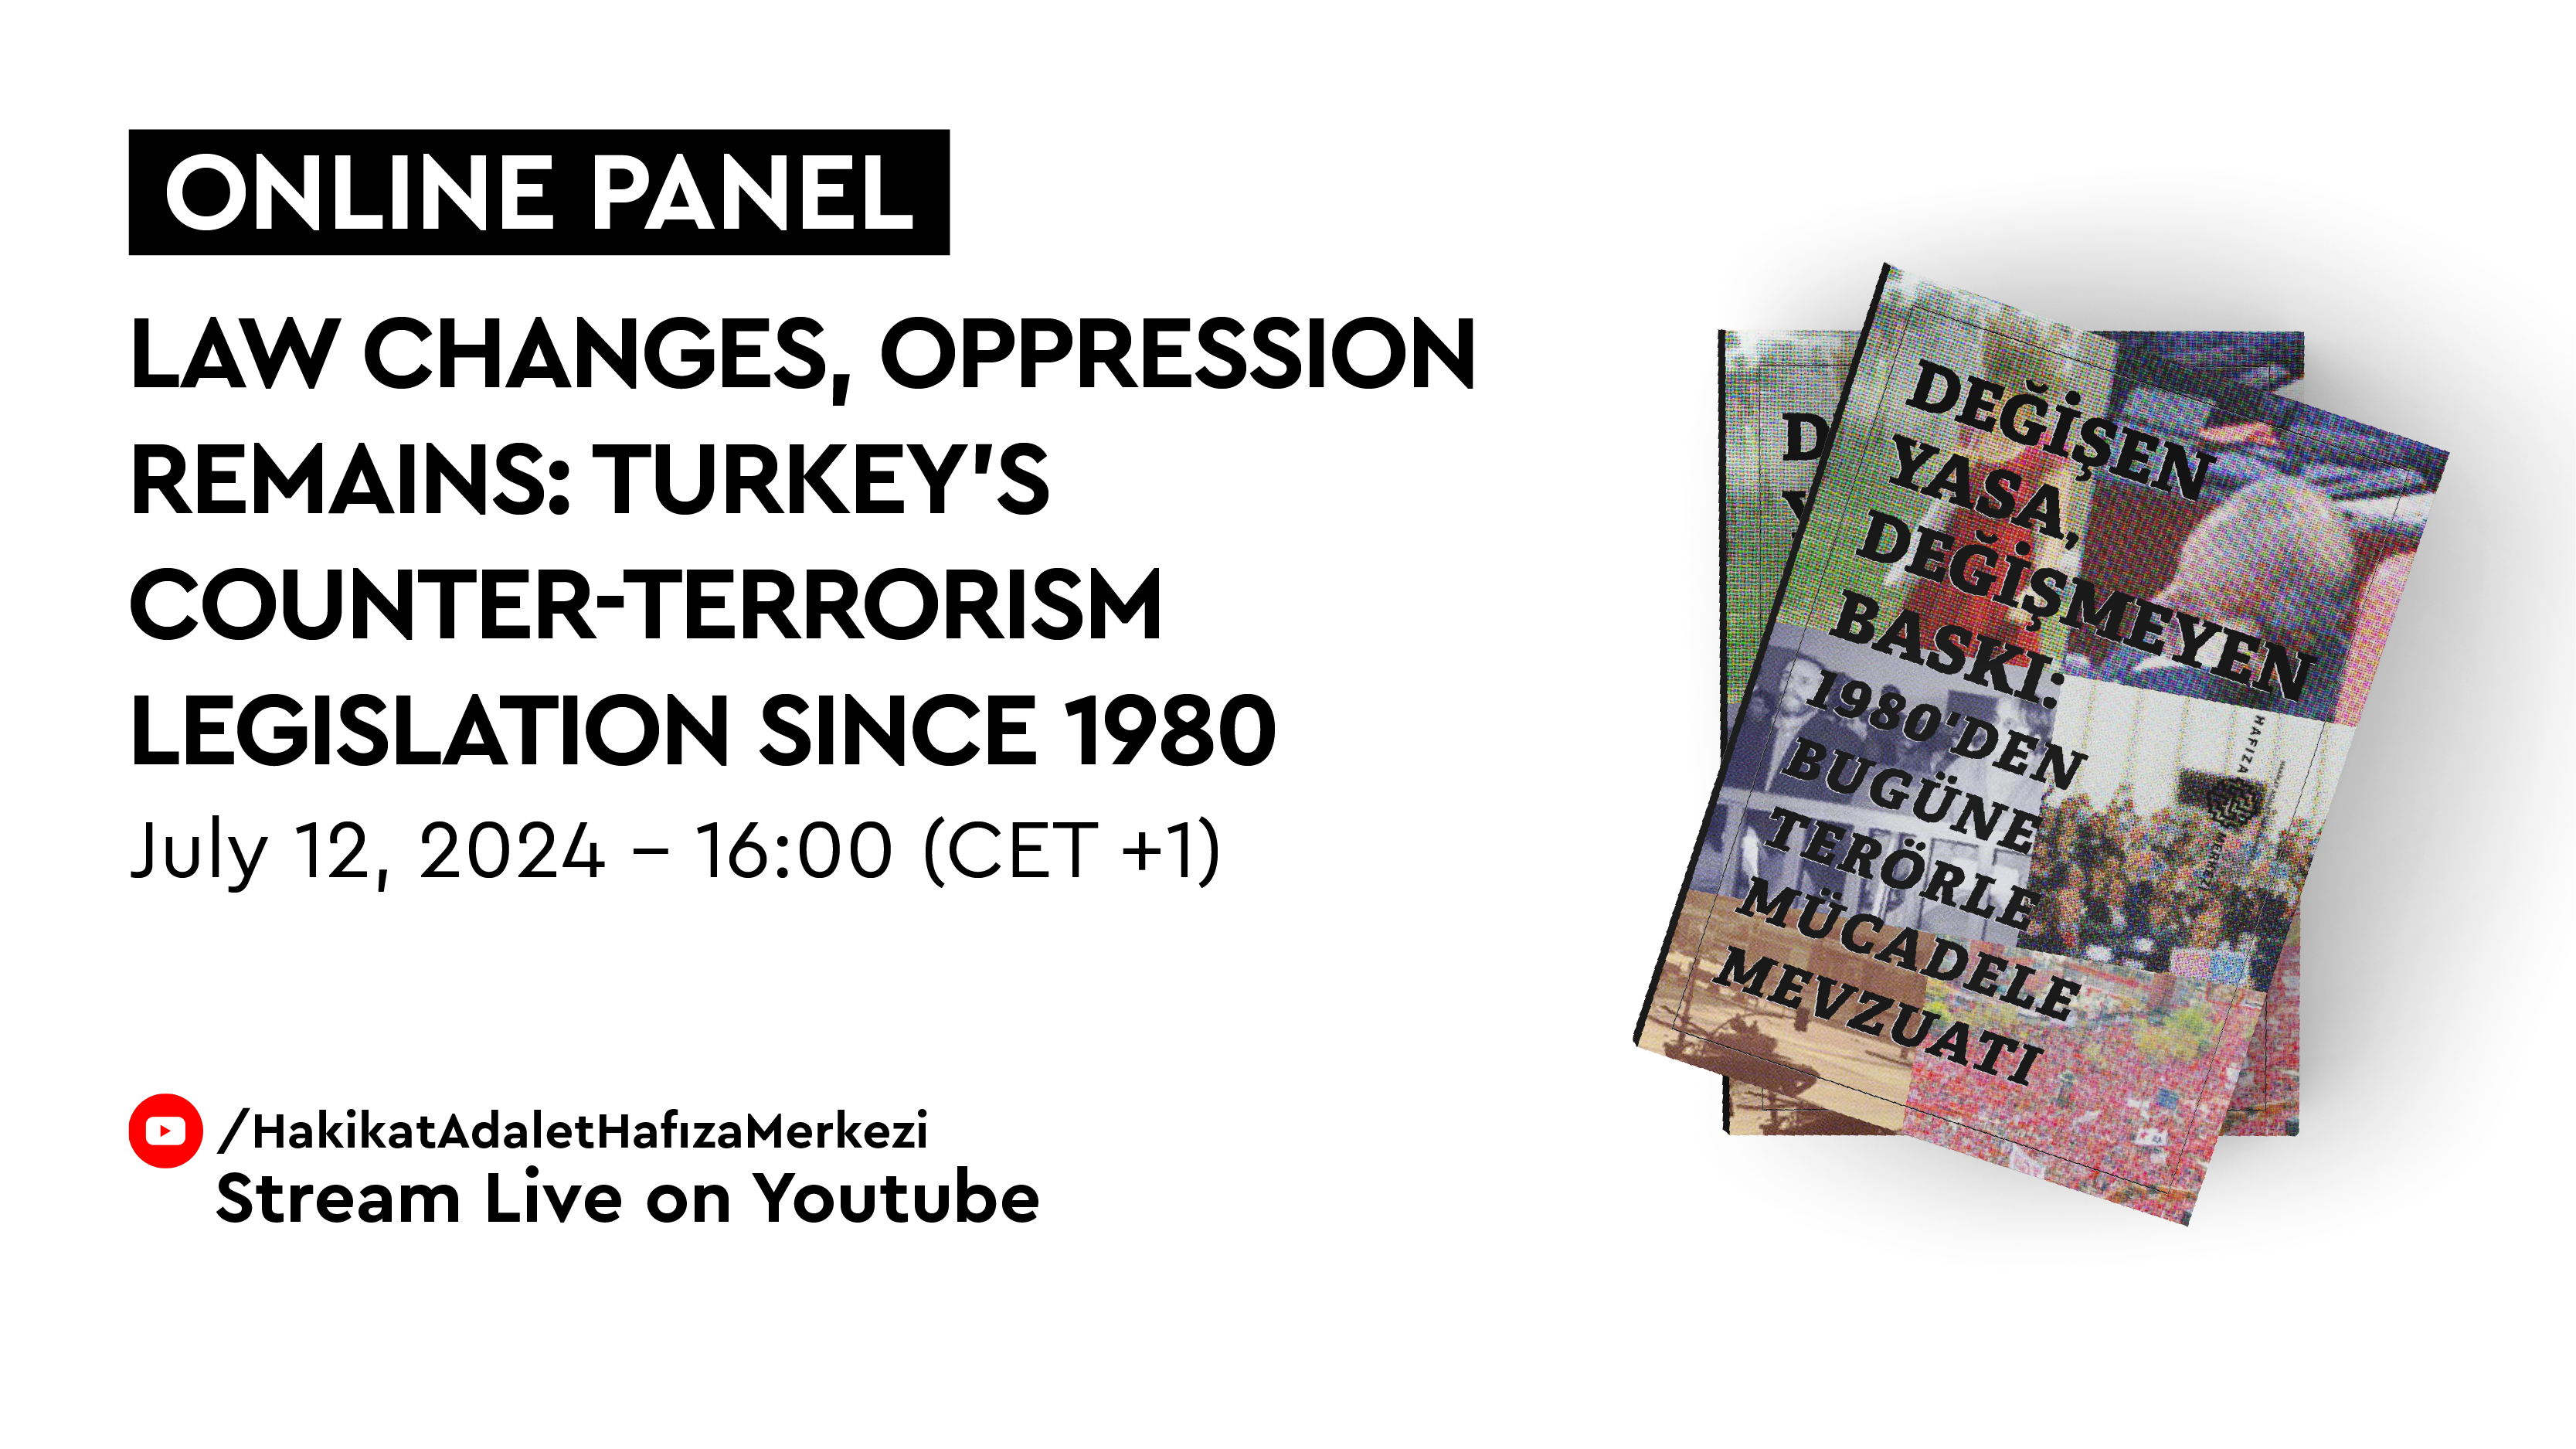 The image shows a mock-up of the “Law Changes, Oppression Remains” publication alongside the date of the panel, July 12 2024, Friday and YouTube live stream information.